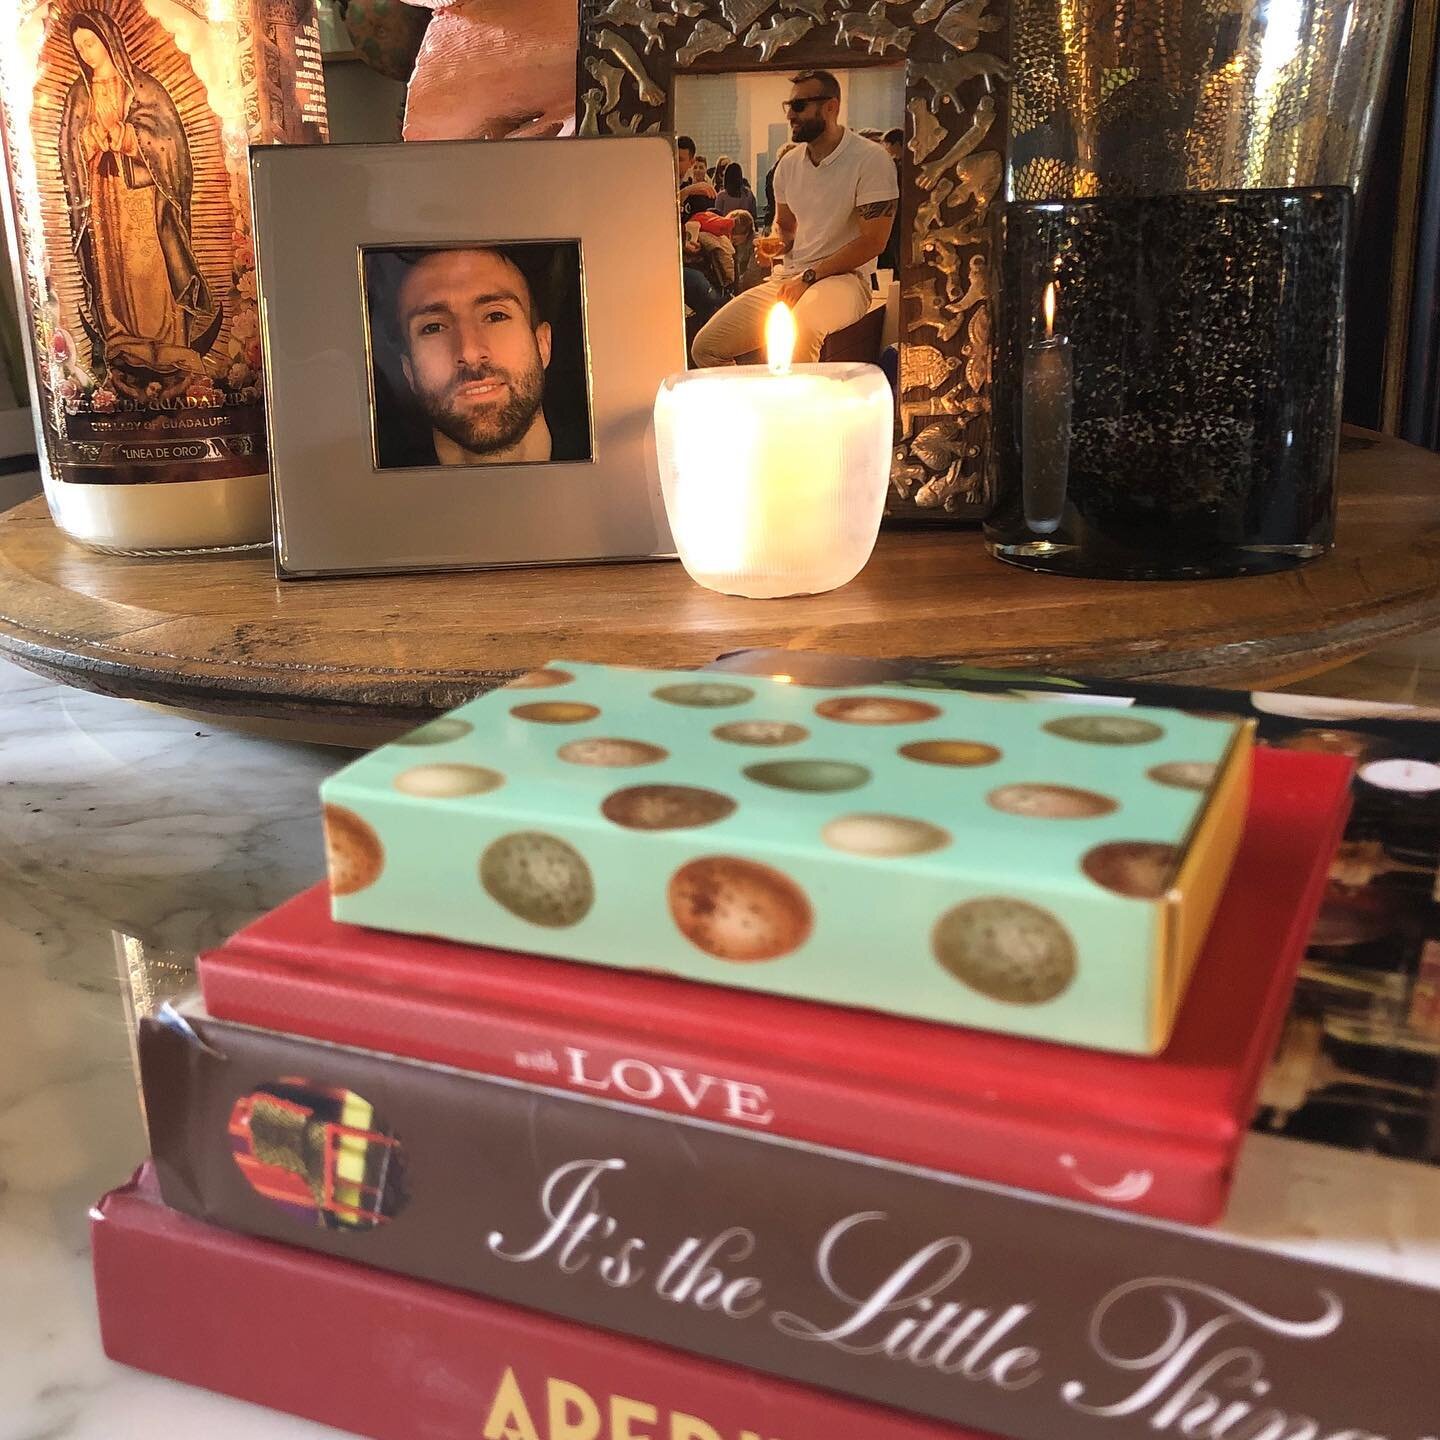 Good Friday Point if View.
I never get tired of what&rsquo;s on top of my coffee table. Currently it&rsquo;s a display of candles, pictures, and a few favorite books and Accessories. Candles lit and prayers made. Counting my blessings.
#happyeaster #